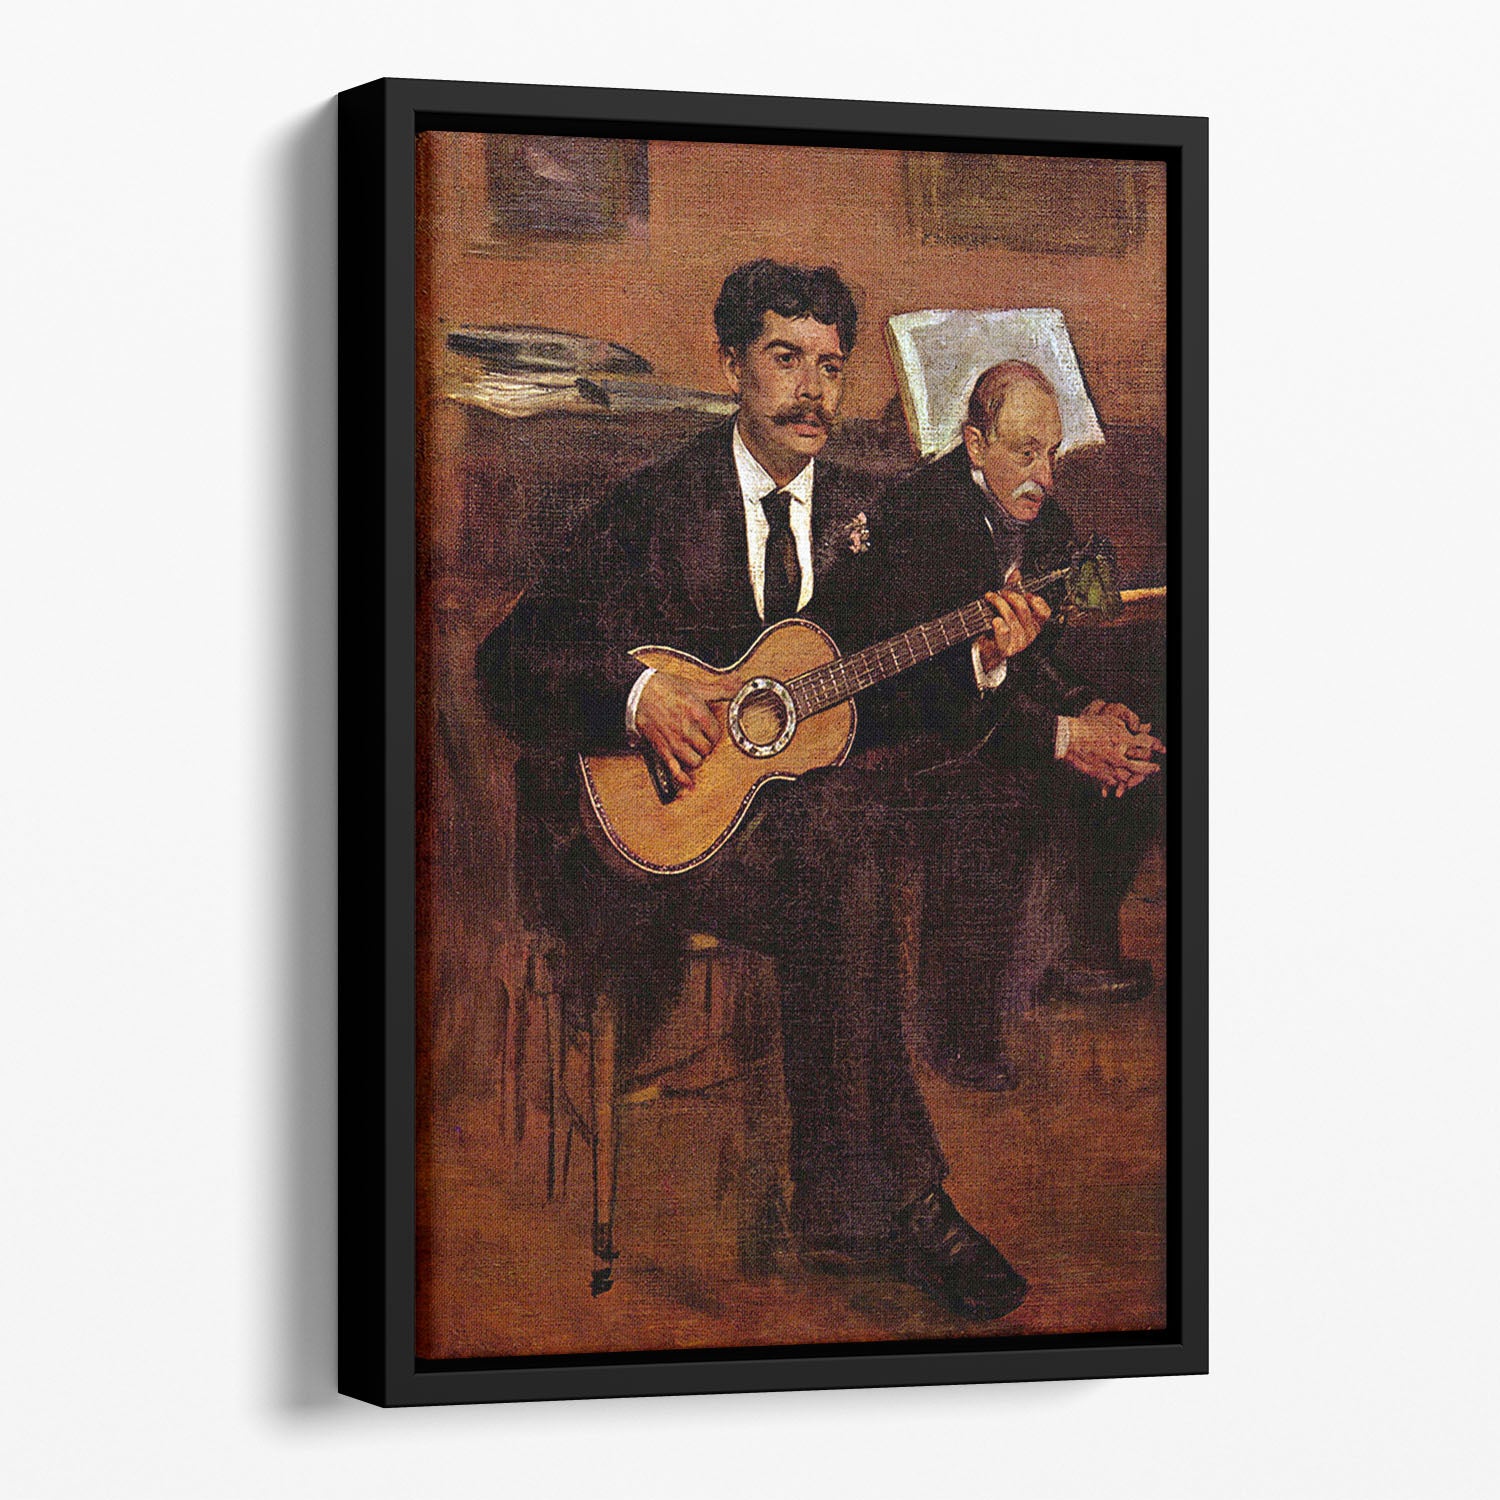 The guitarist Pagans and Monsieur Degas by Degas Floating Framed Canvas